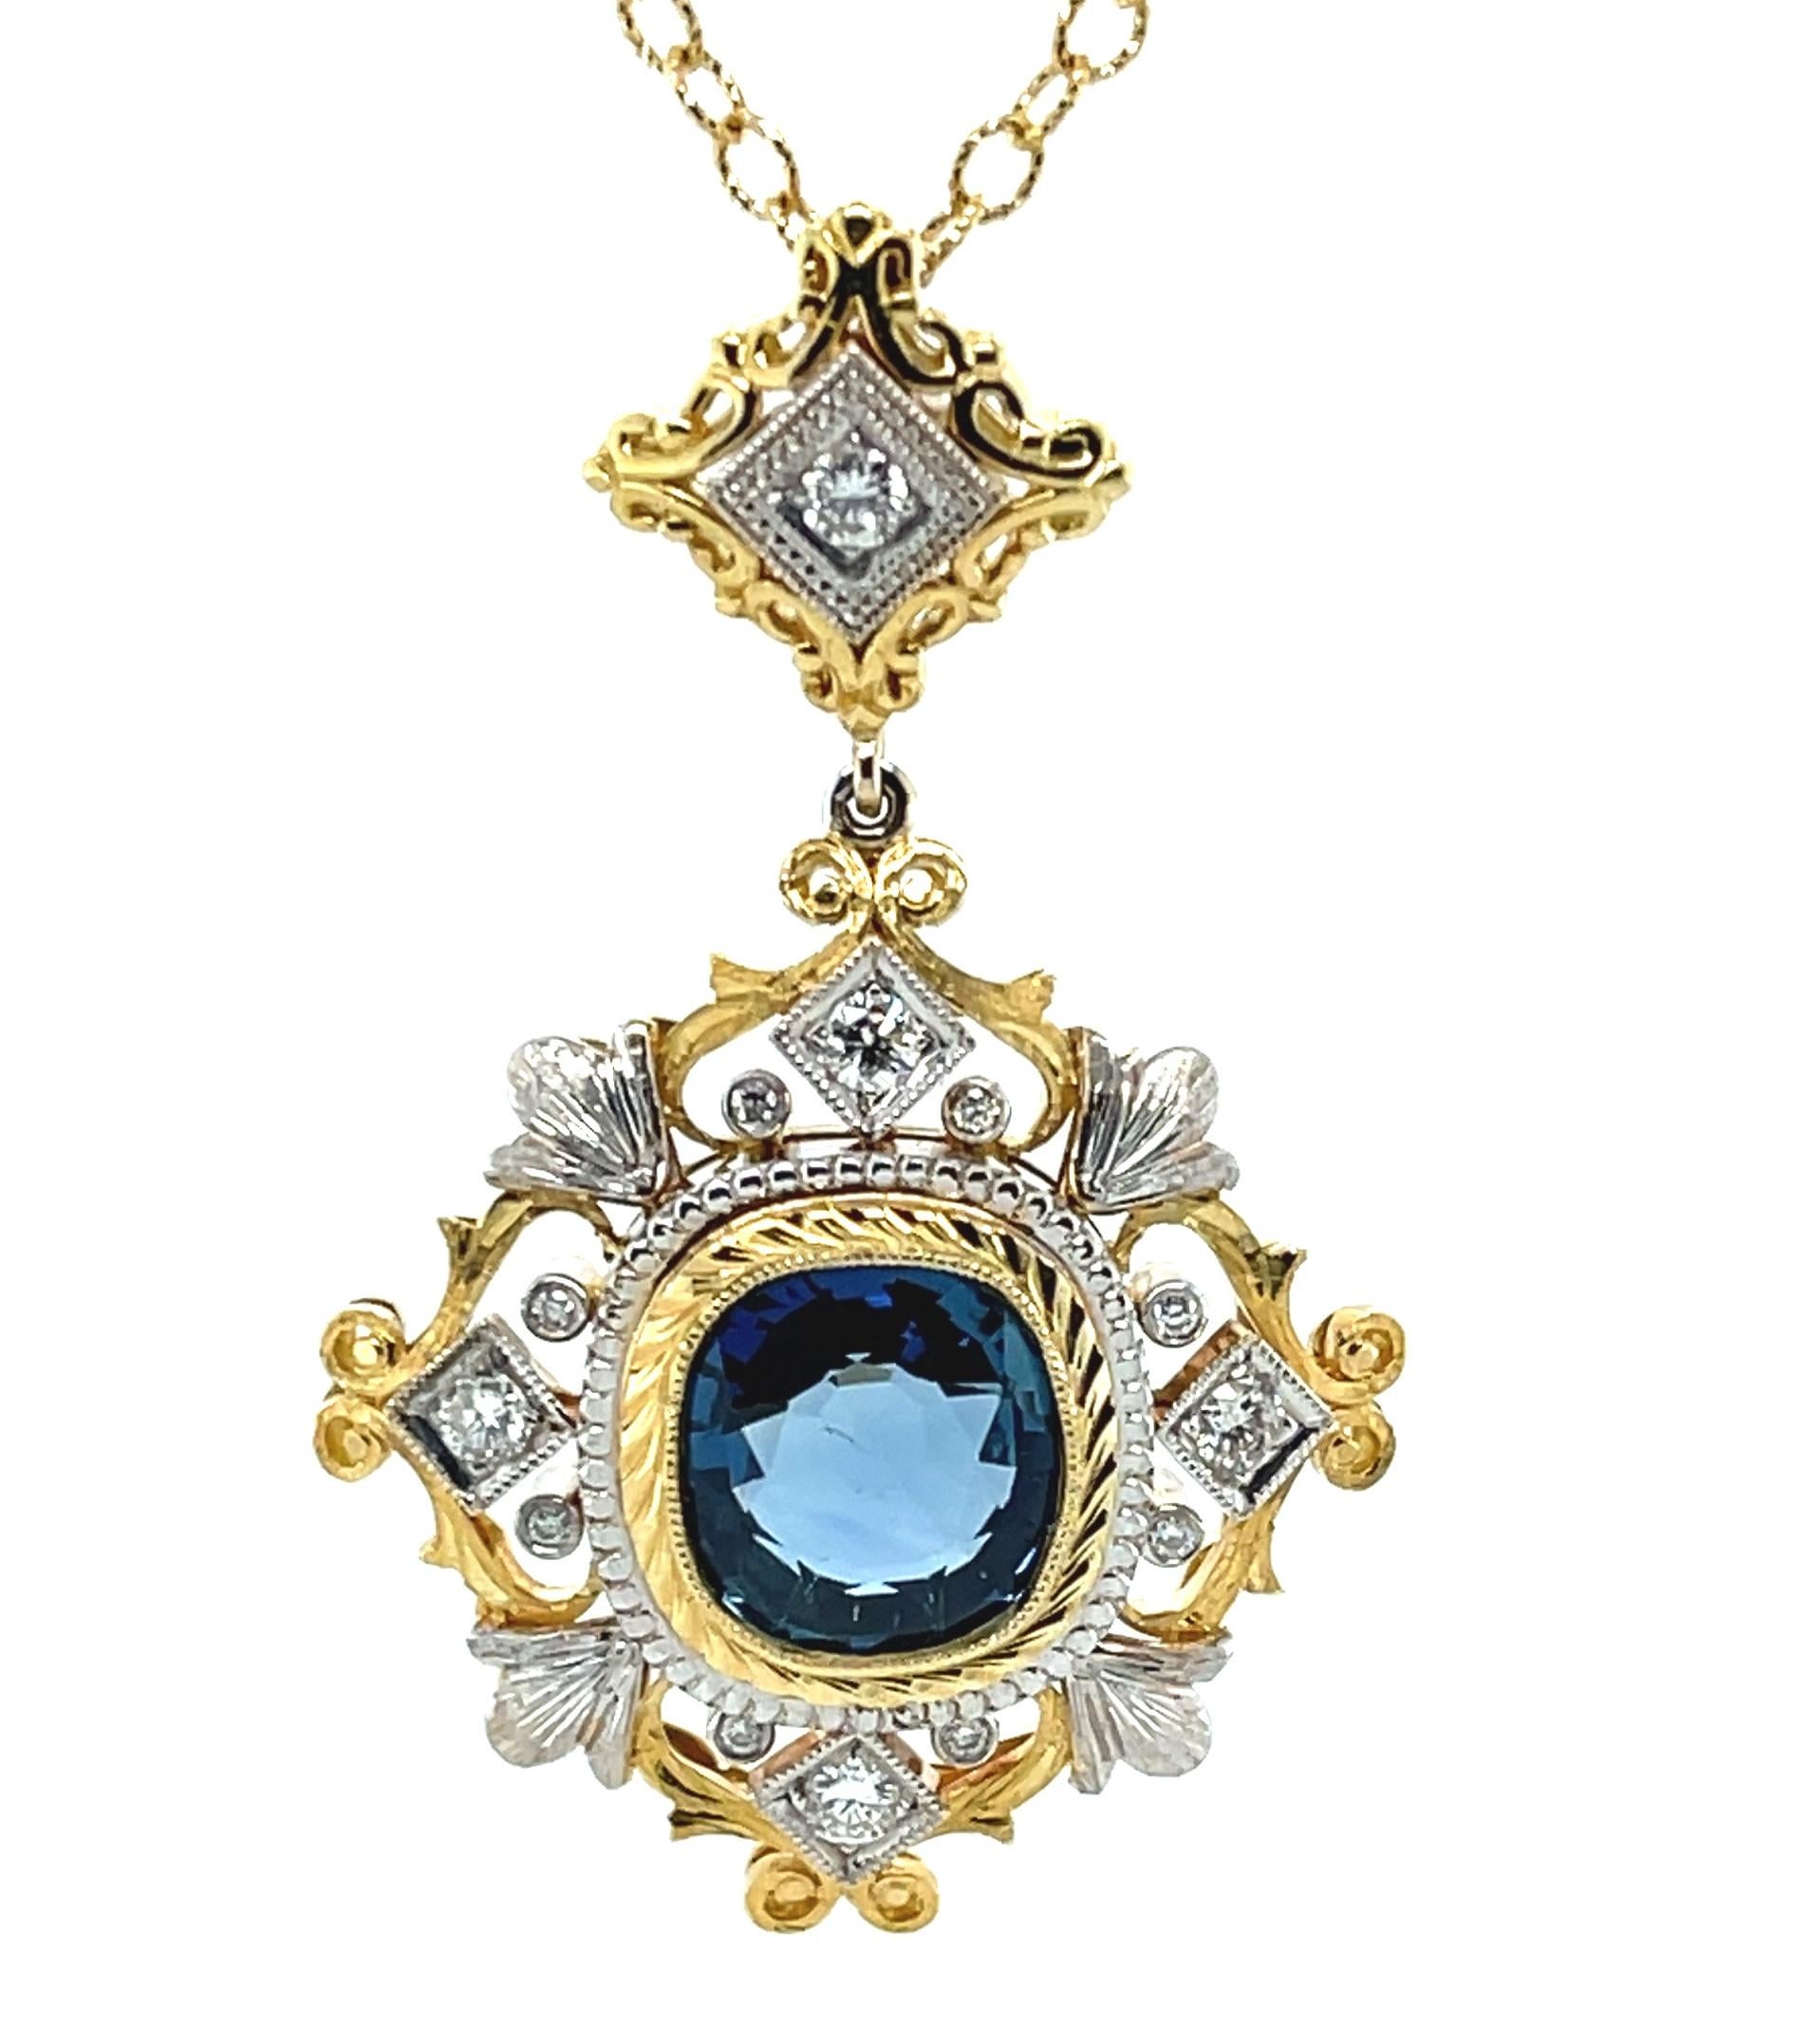 This pendant features a gem-quality blue sapphire and is a stunning example of timeless elegance! The custom-made design was envisioned specifically for this sapphire and displays the extraordinary craftsmanship that is a hallmark of our jewelry.